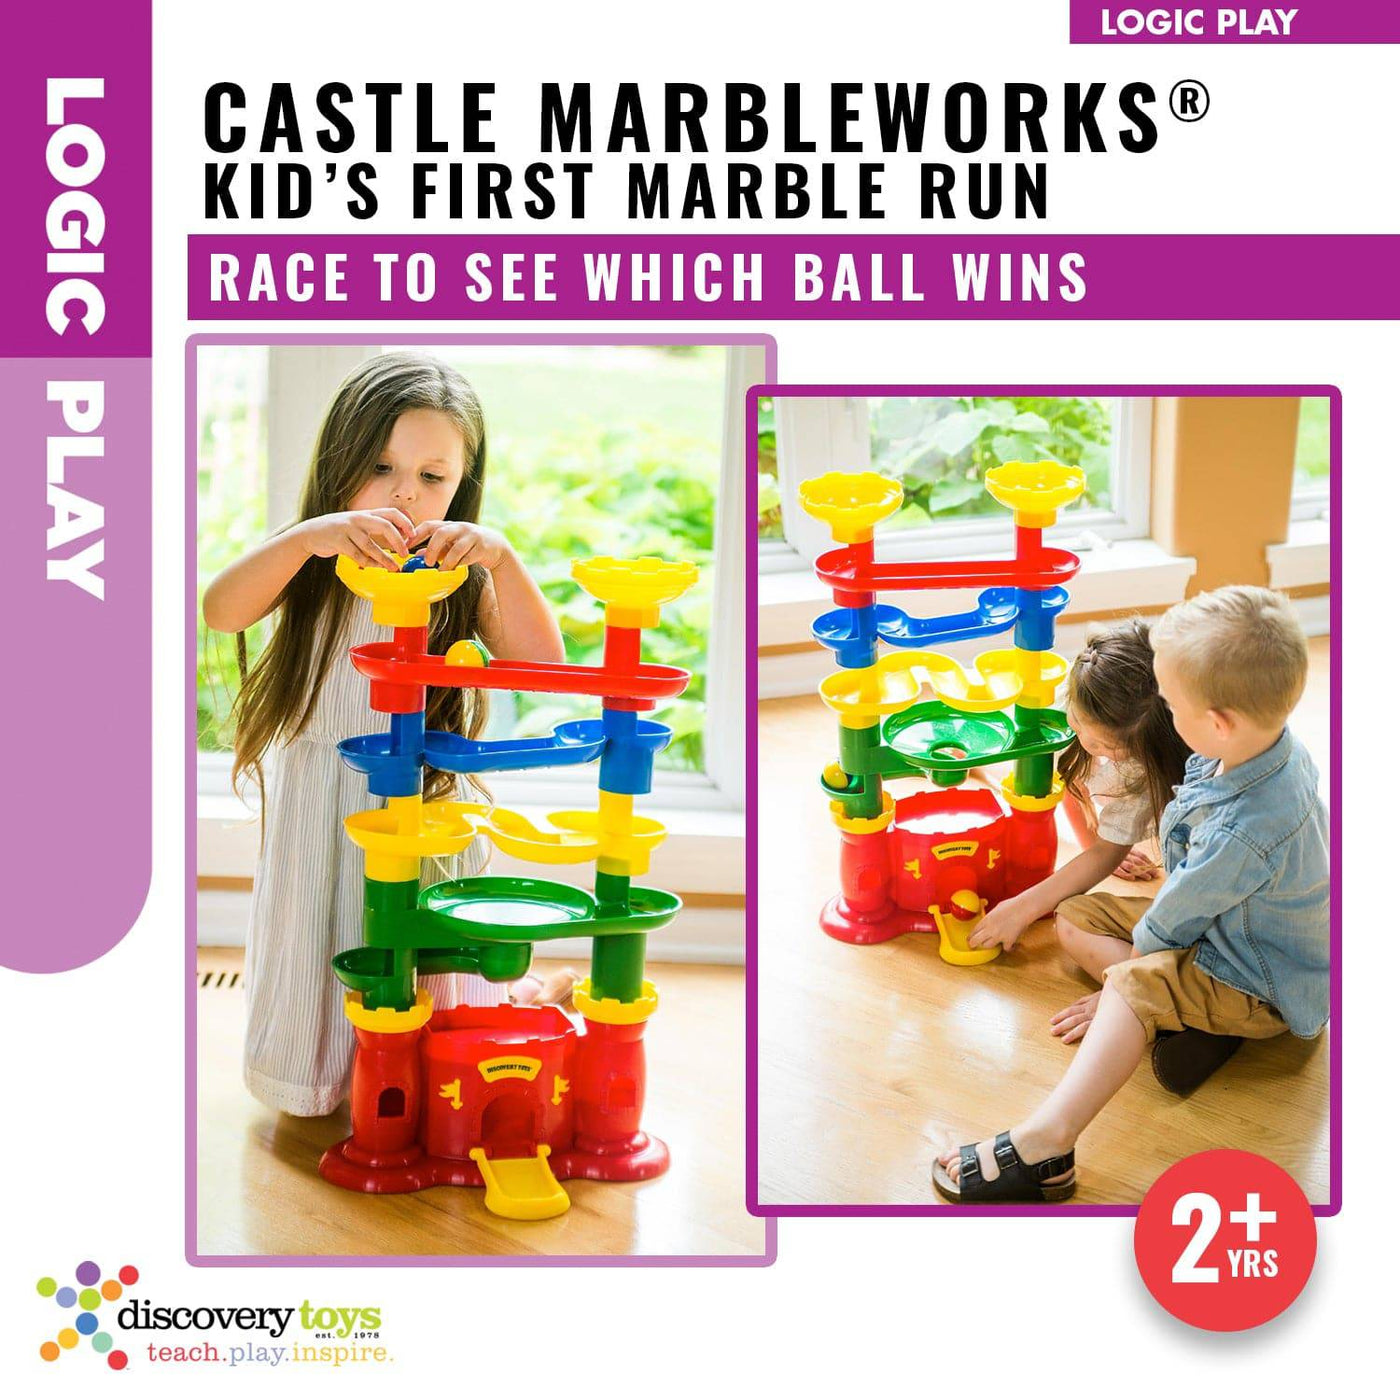 CASTLE MARBLEWORKS Chime Ball Drop Tower Run Toy - Discovery Toys